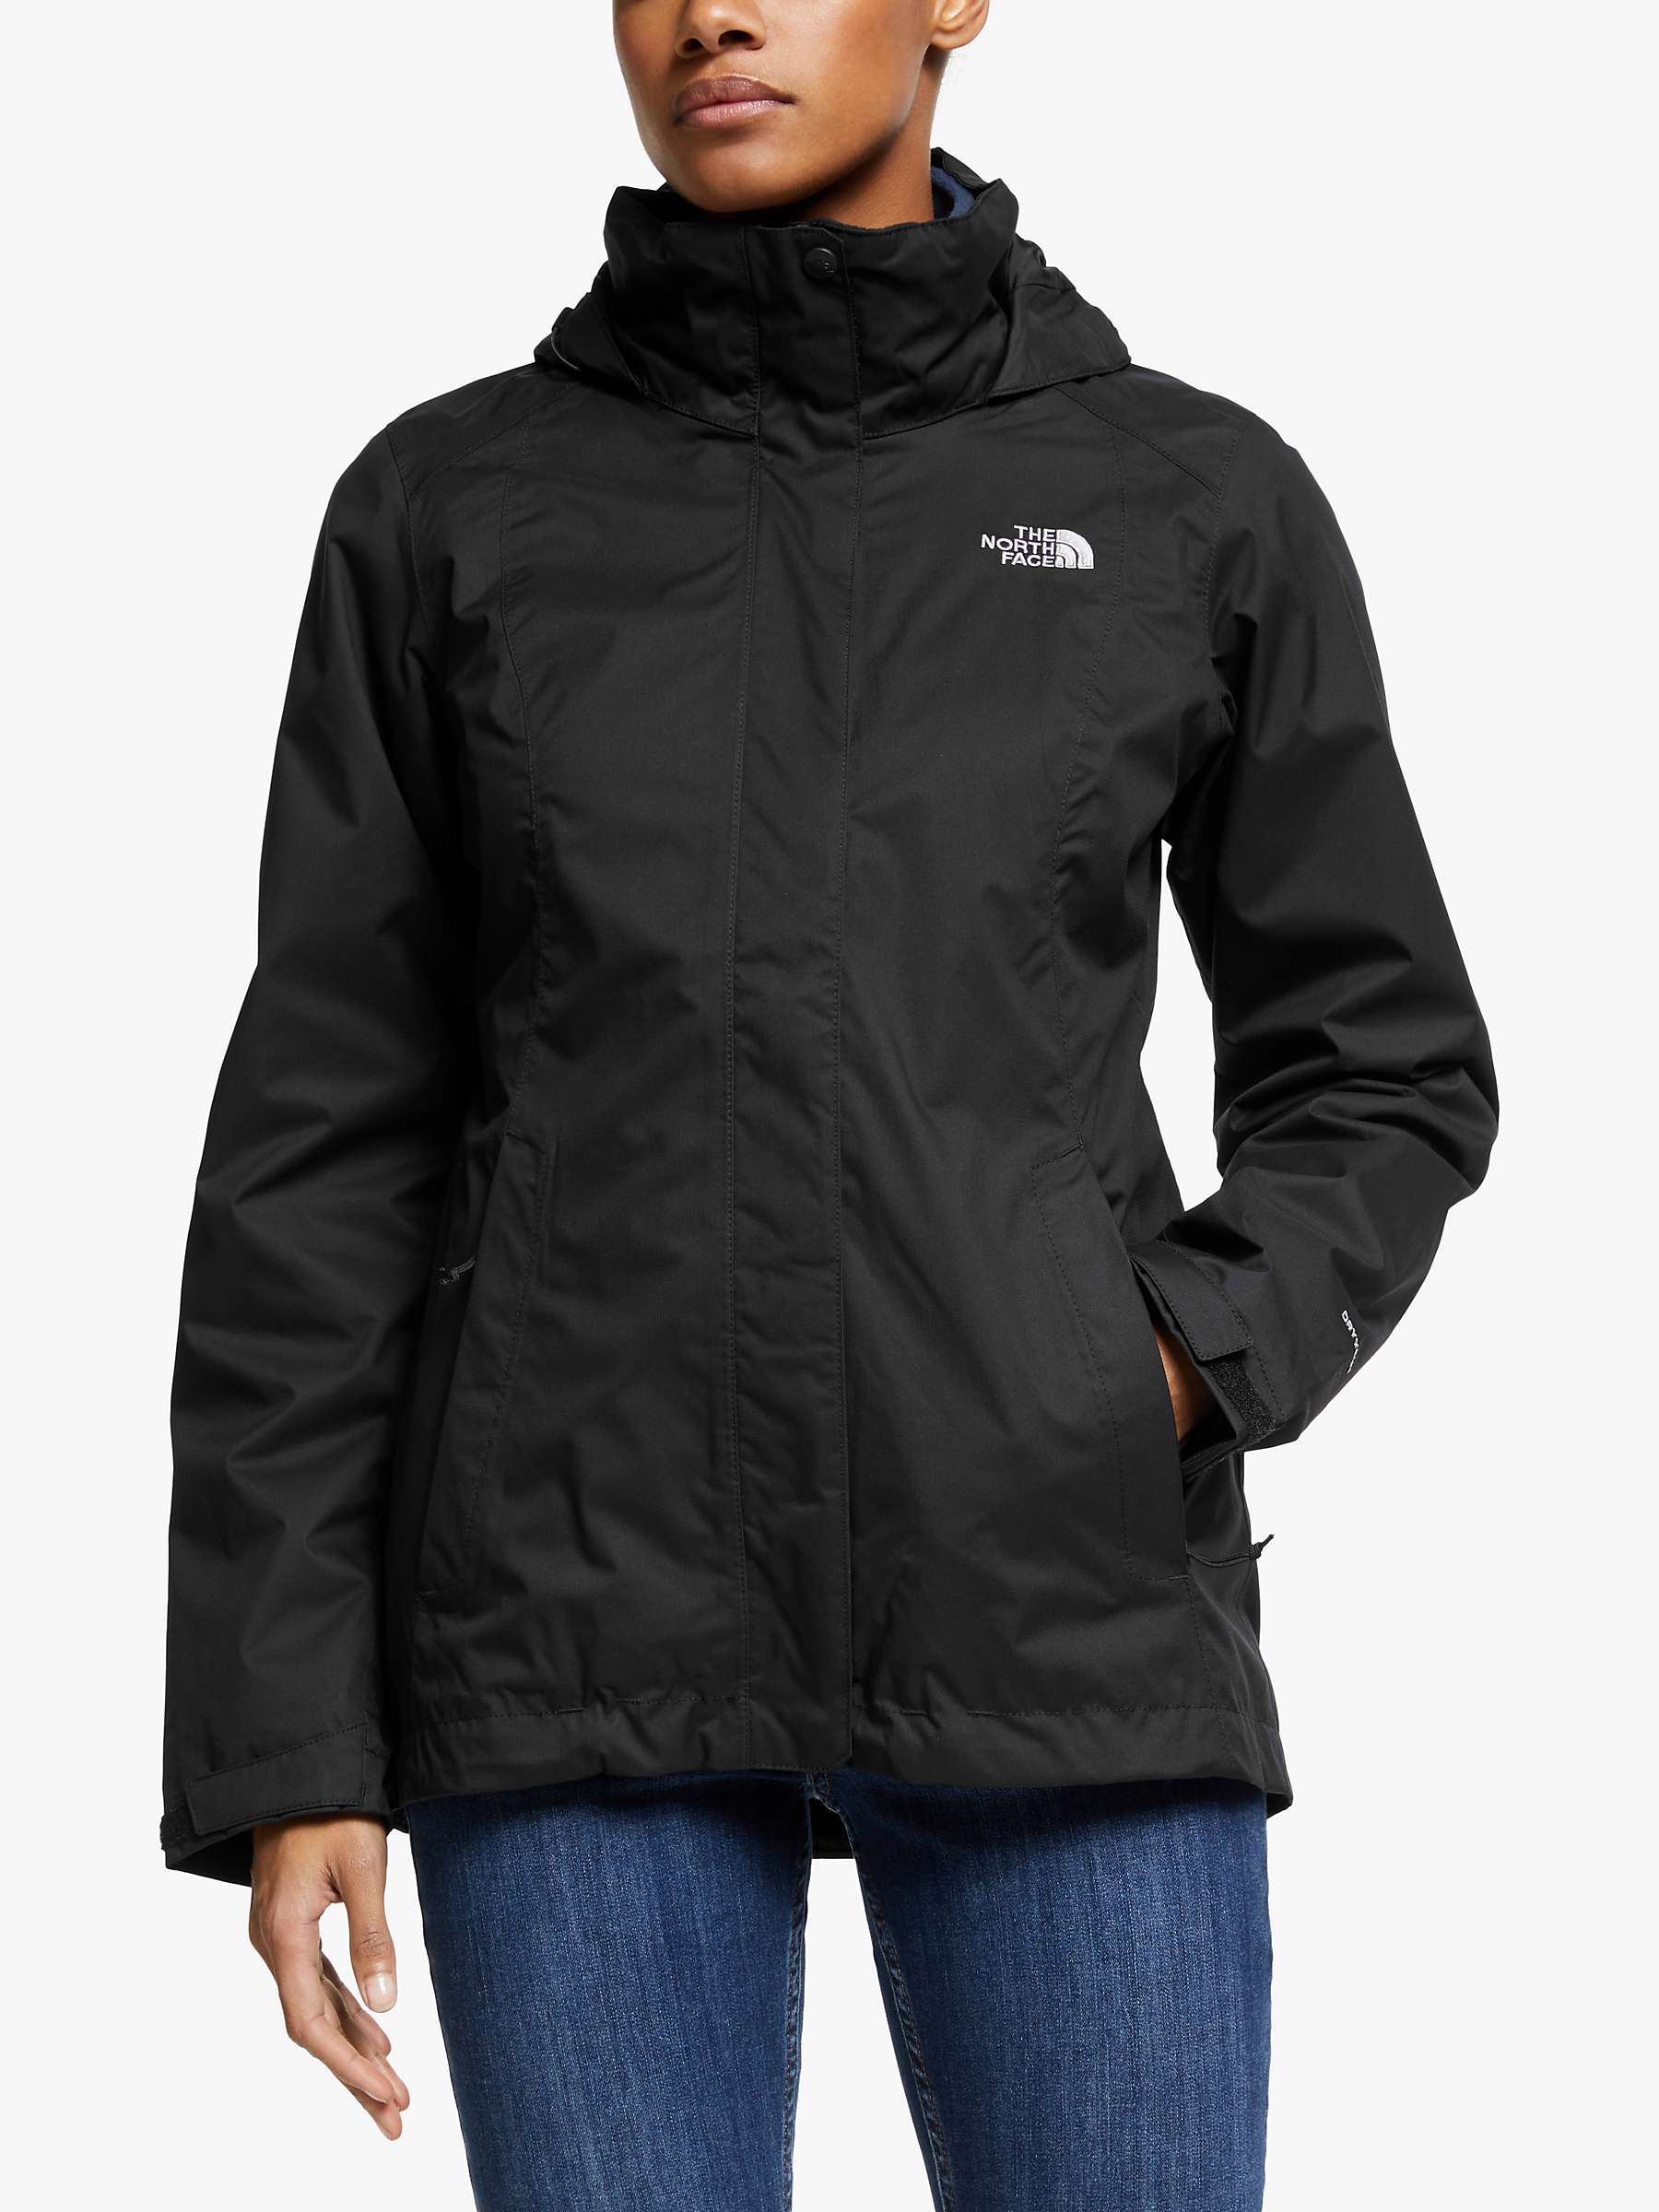 The North Face Evolve II Triclimate 3-in-1 Waterproof Women's Jacket, Black  at John Lewis & Partners